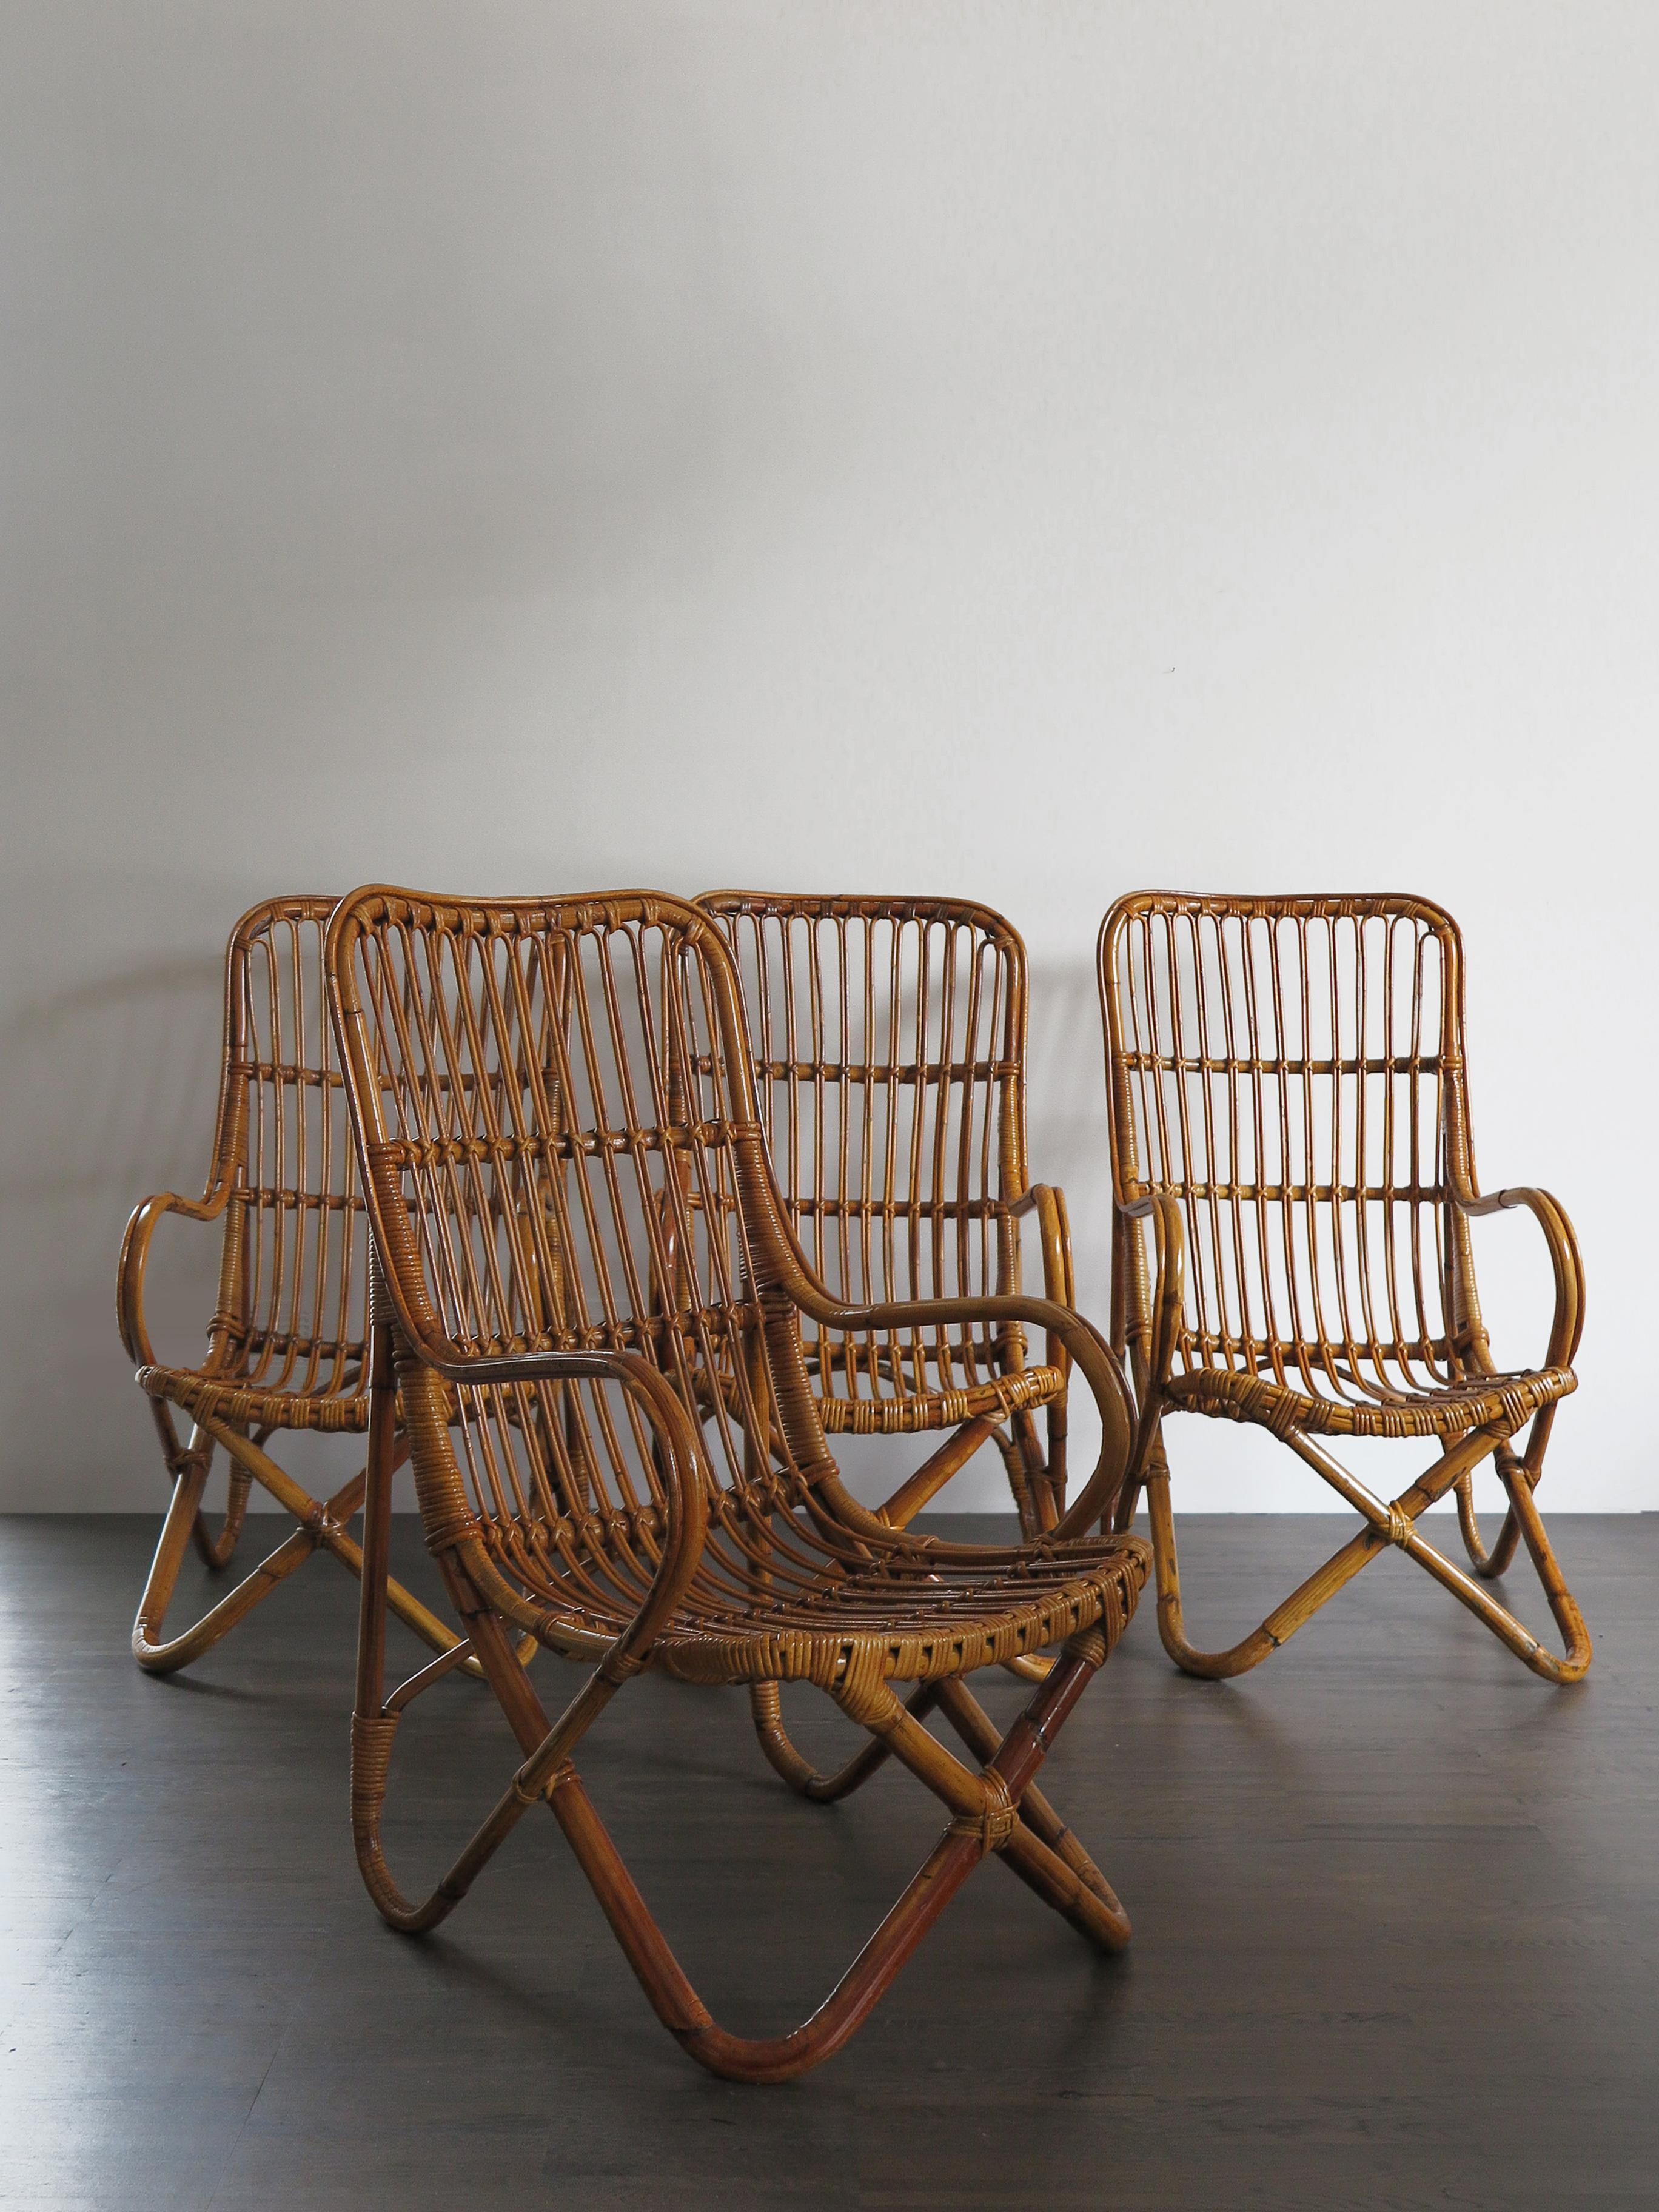 Italian Mid-Century Modern design rattan bamboo armchairs in the style of Tito Agnoli Bonacina, set of fours, circa 1950s.
Please note that the armchairs are original of the period and this shows normal signs of age and use.